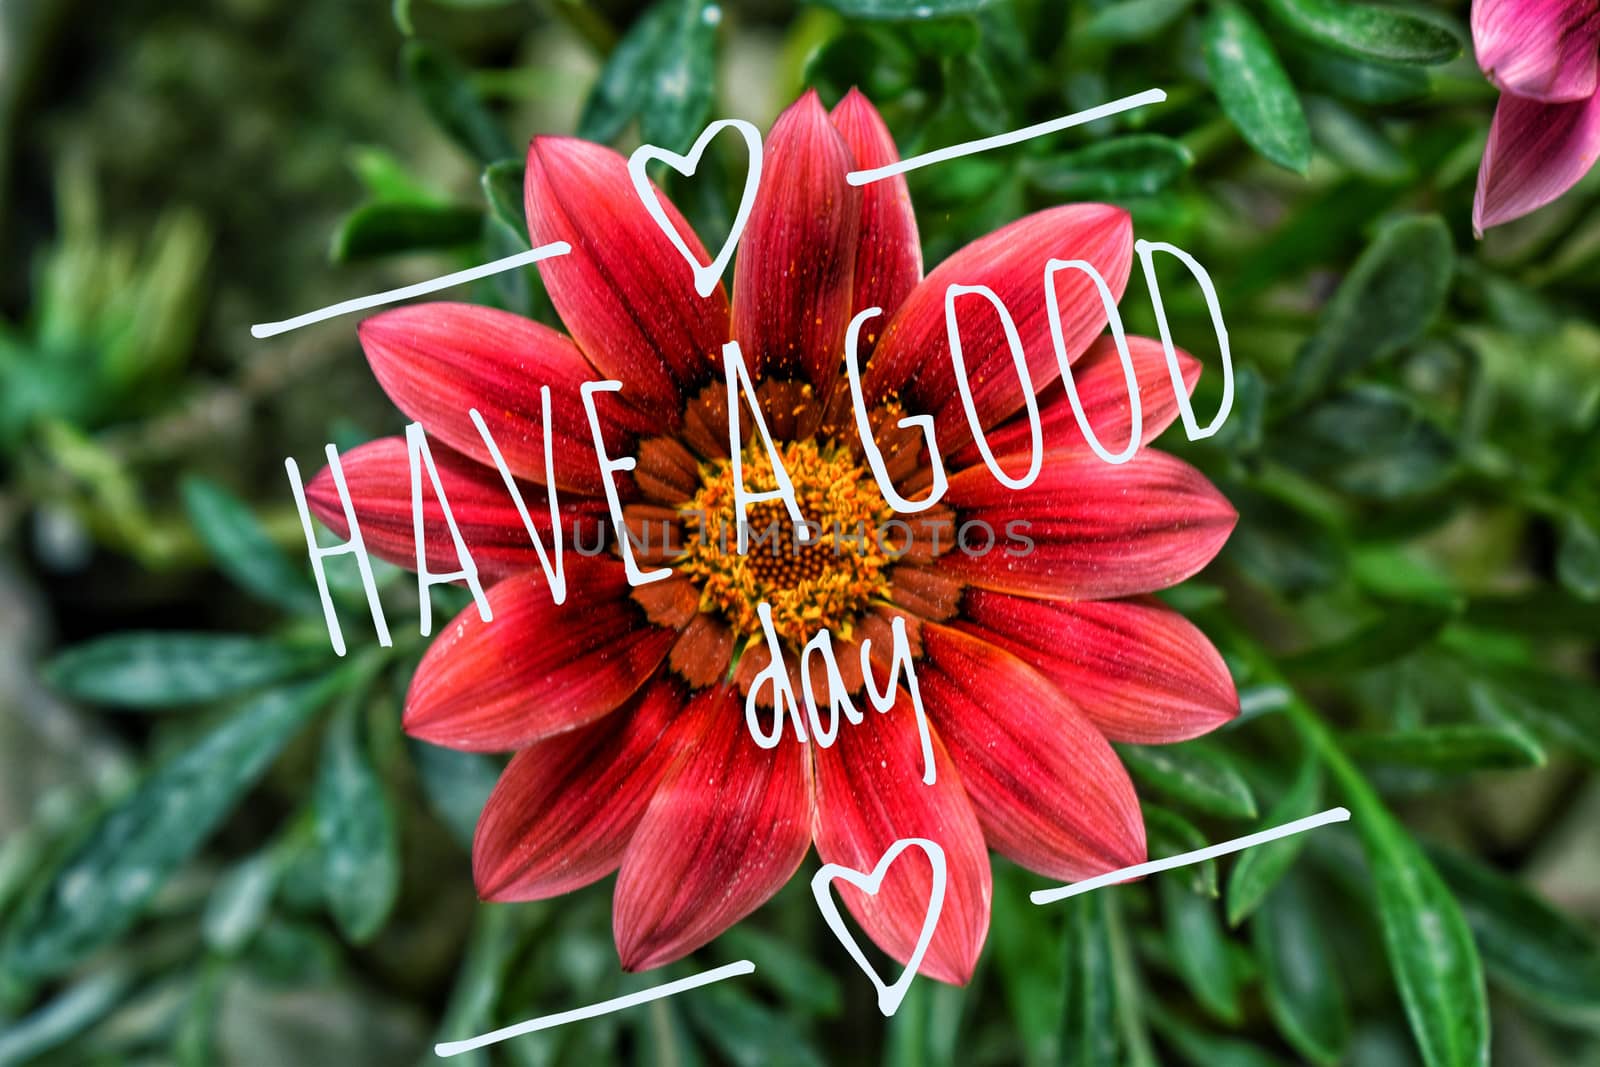 Have a great day wishing message. The Have a good day text is in front of a beautiful red flower background